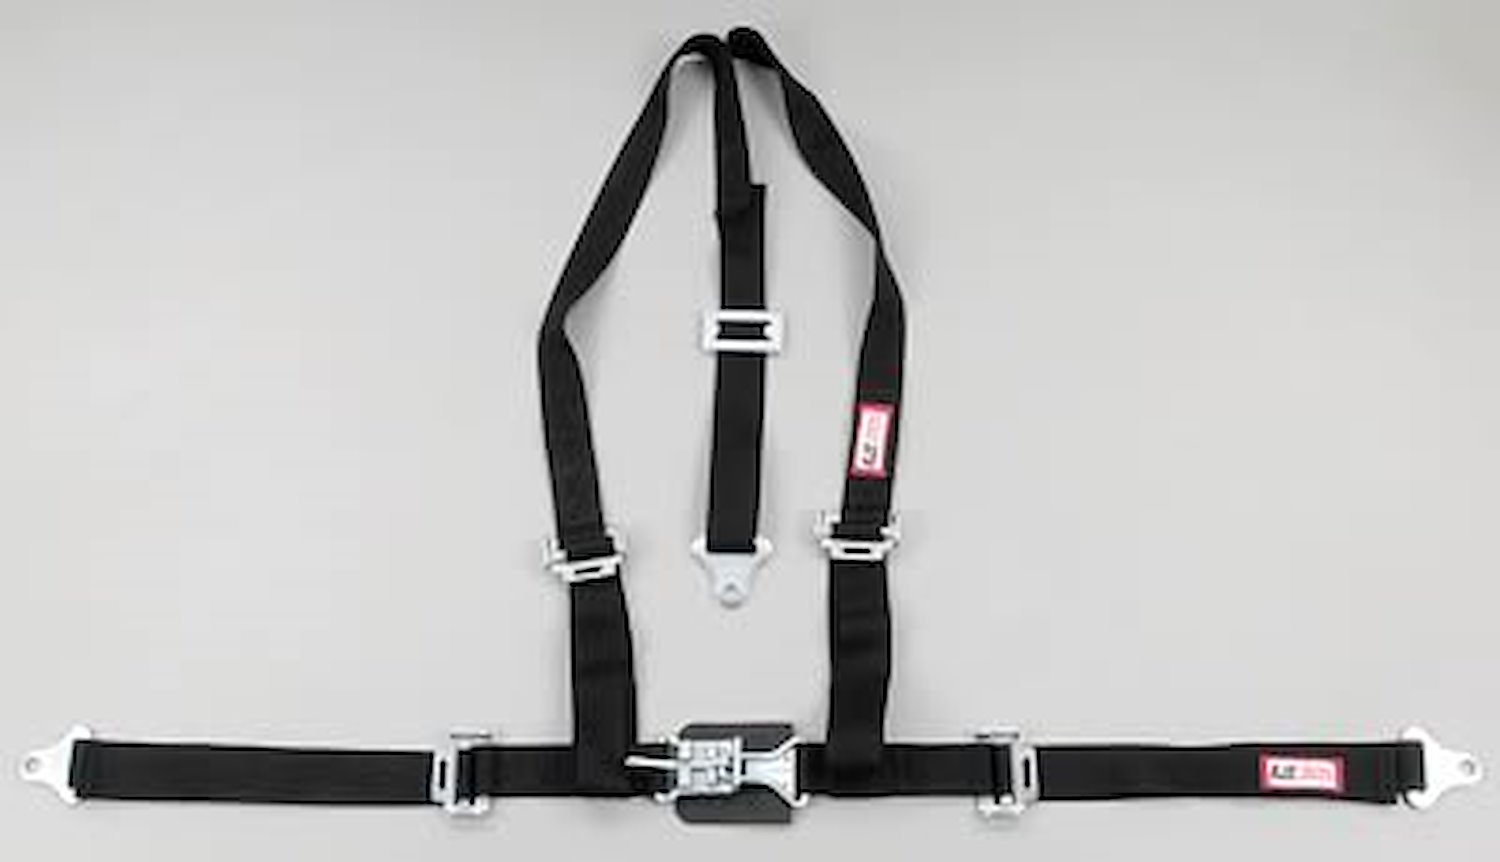 NON-SFI L&L HARNESS 2 PULL DOWN Lap Belt w/Adjuster SNAP 2 S.H. Individual FLOOR MOUNT w/STERNUM STRAP WRAP/SNAP YELLOW